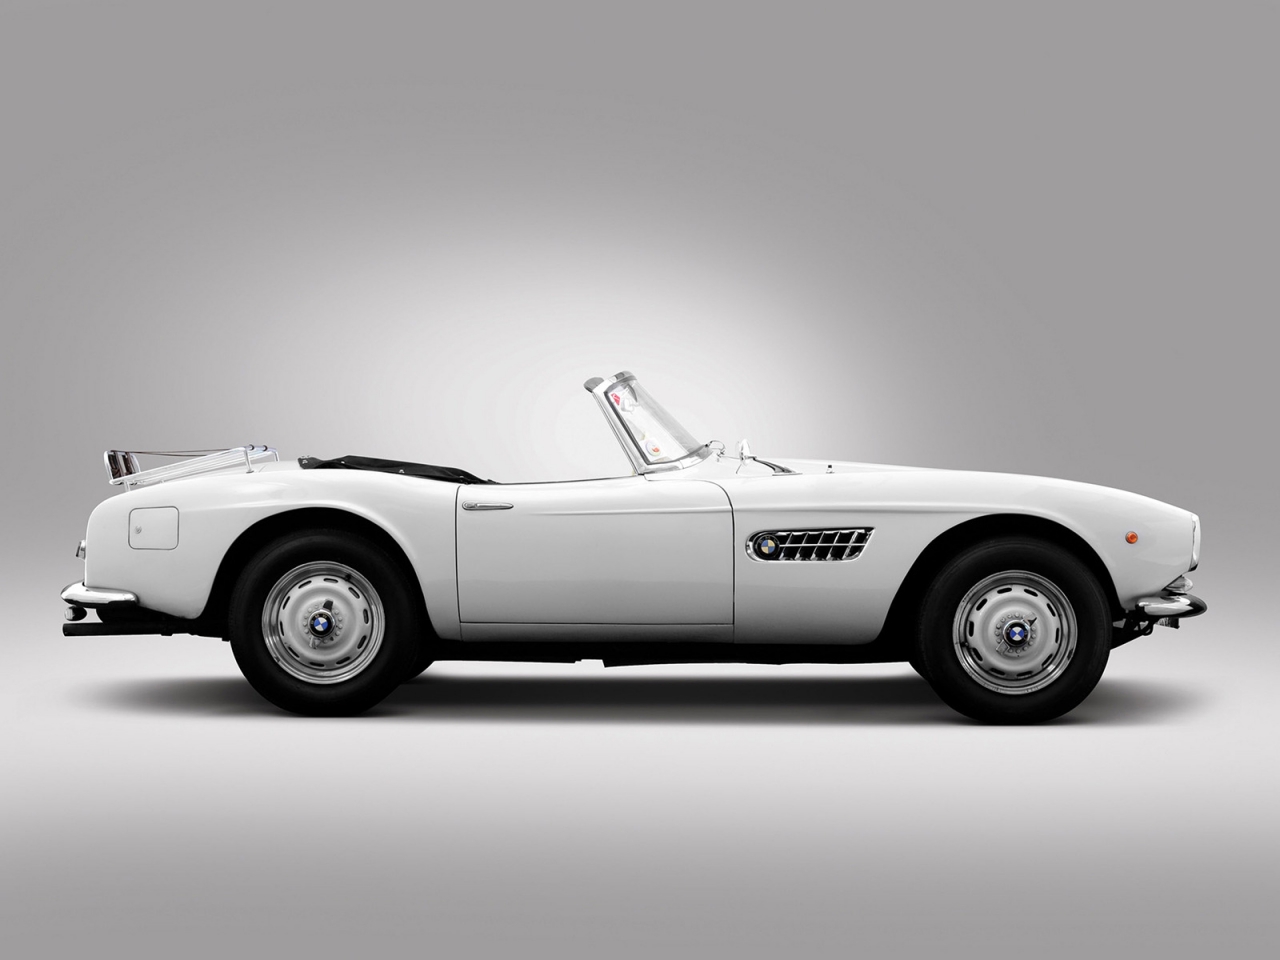 BMW 507 1957 for 1280 x 960 resolution